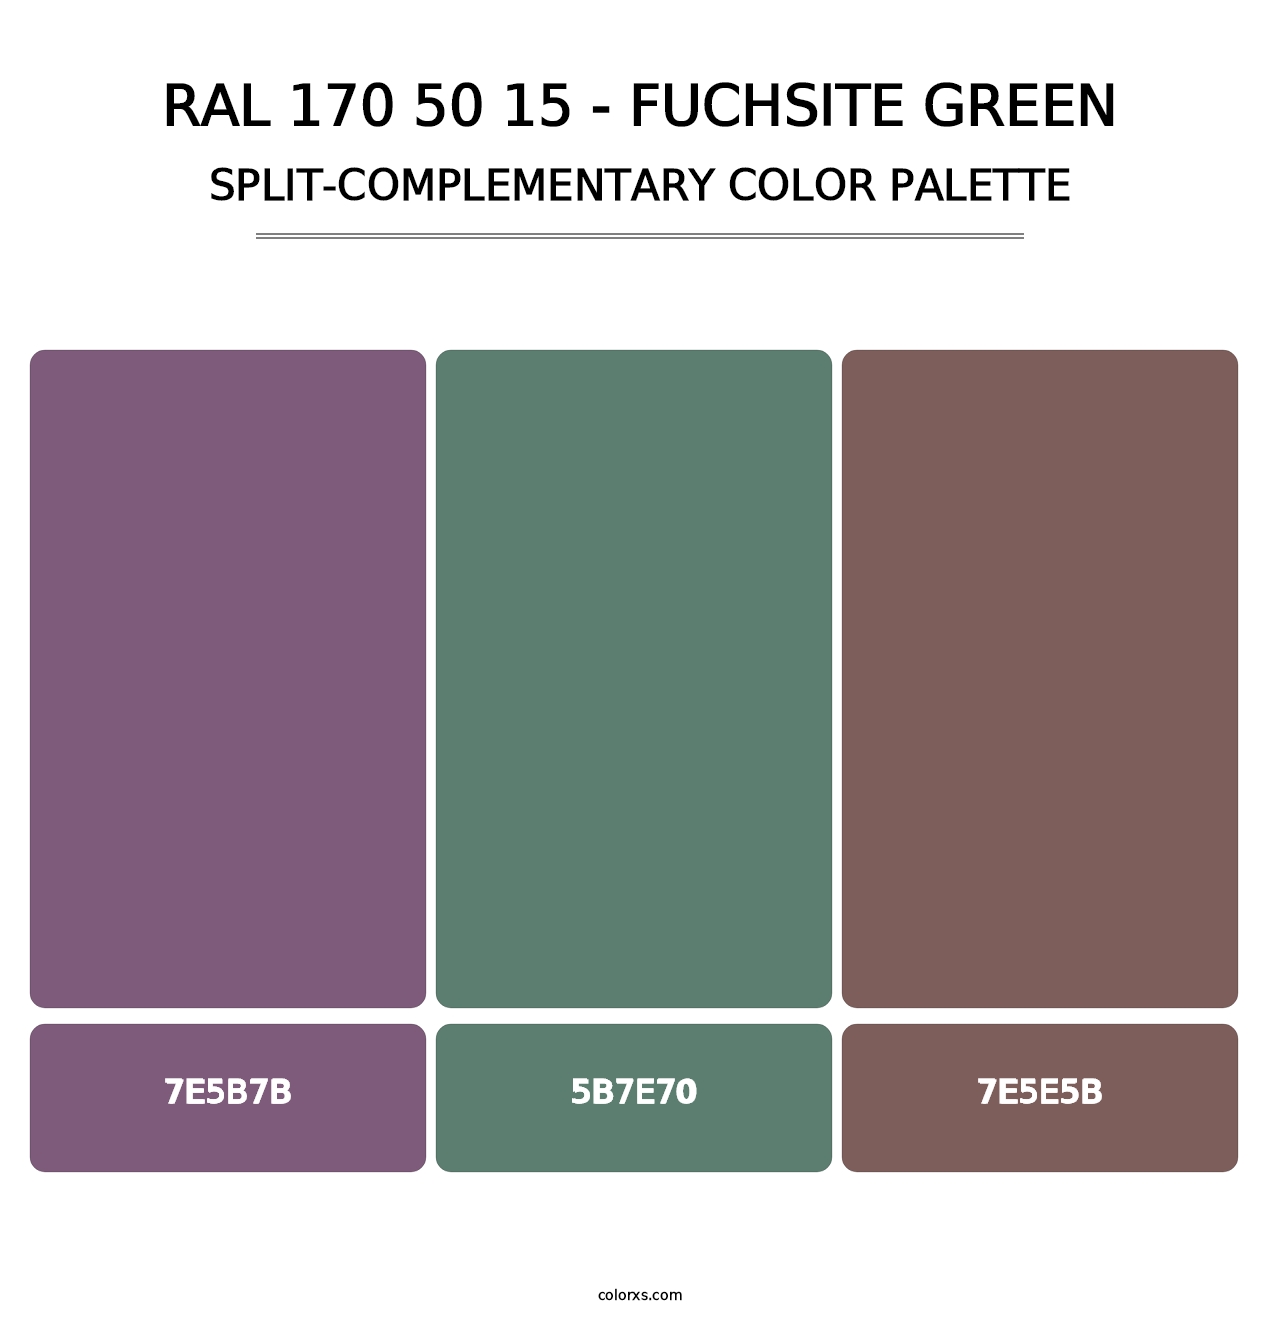 RAL 170 50 15 - Fuchsite Green - Split-Complementary Color Palette